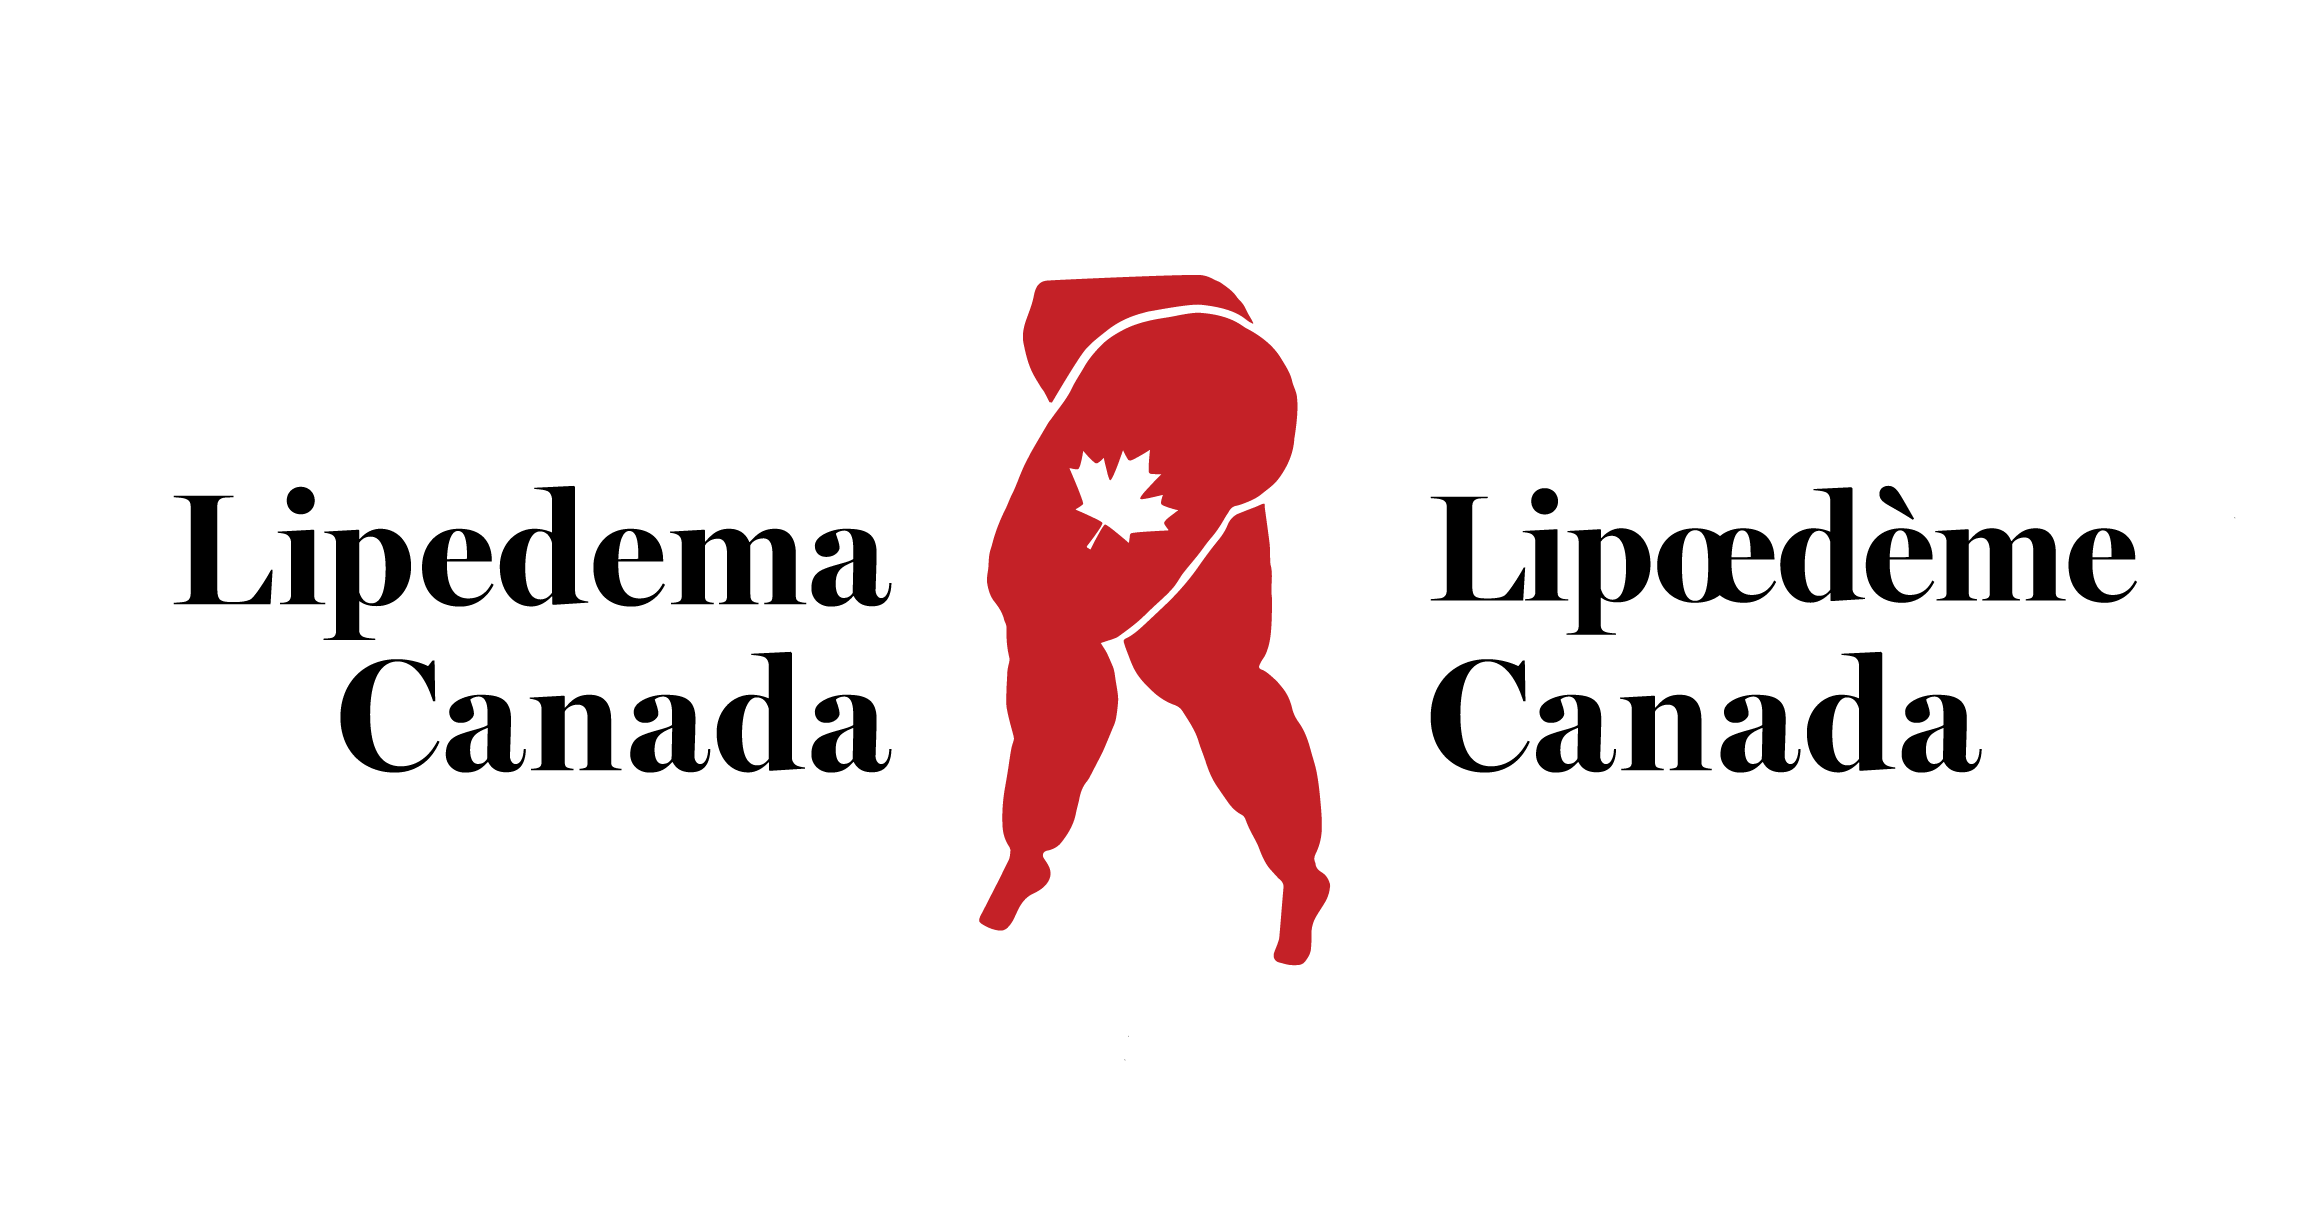 Logo for Lipedema Canada with the organization's name in English and French, featuring red legs with a white maple leaf in the background.